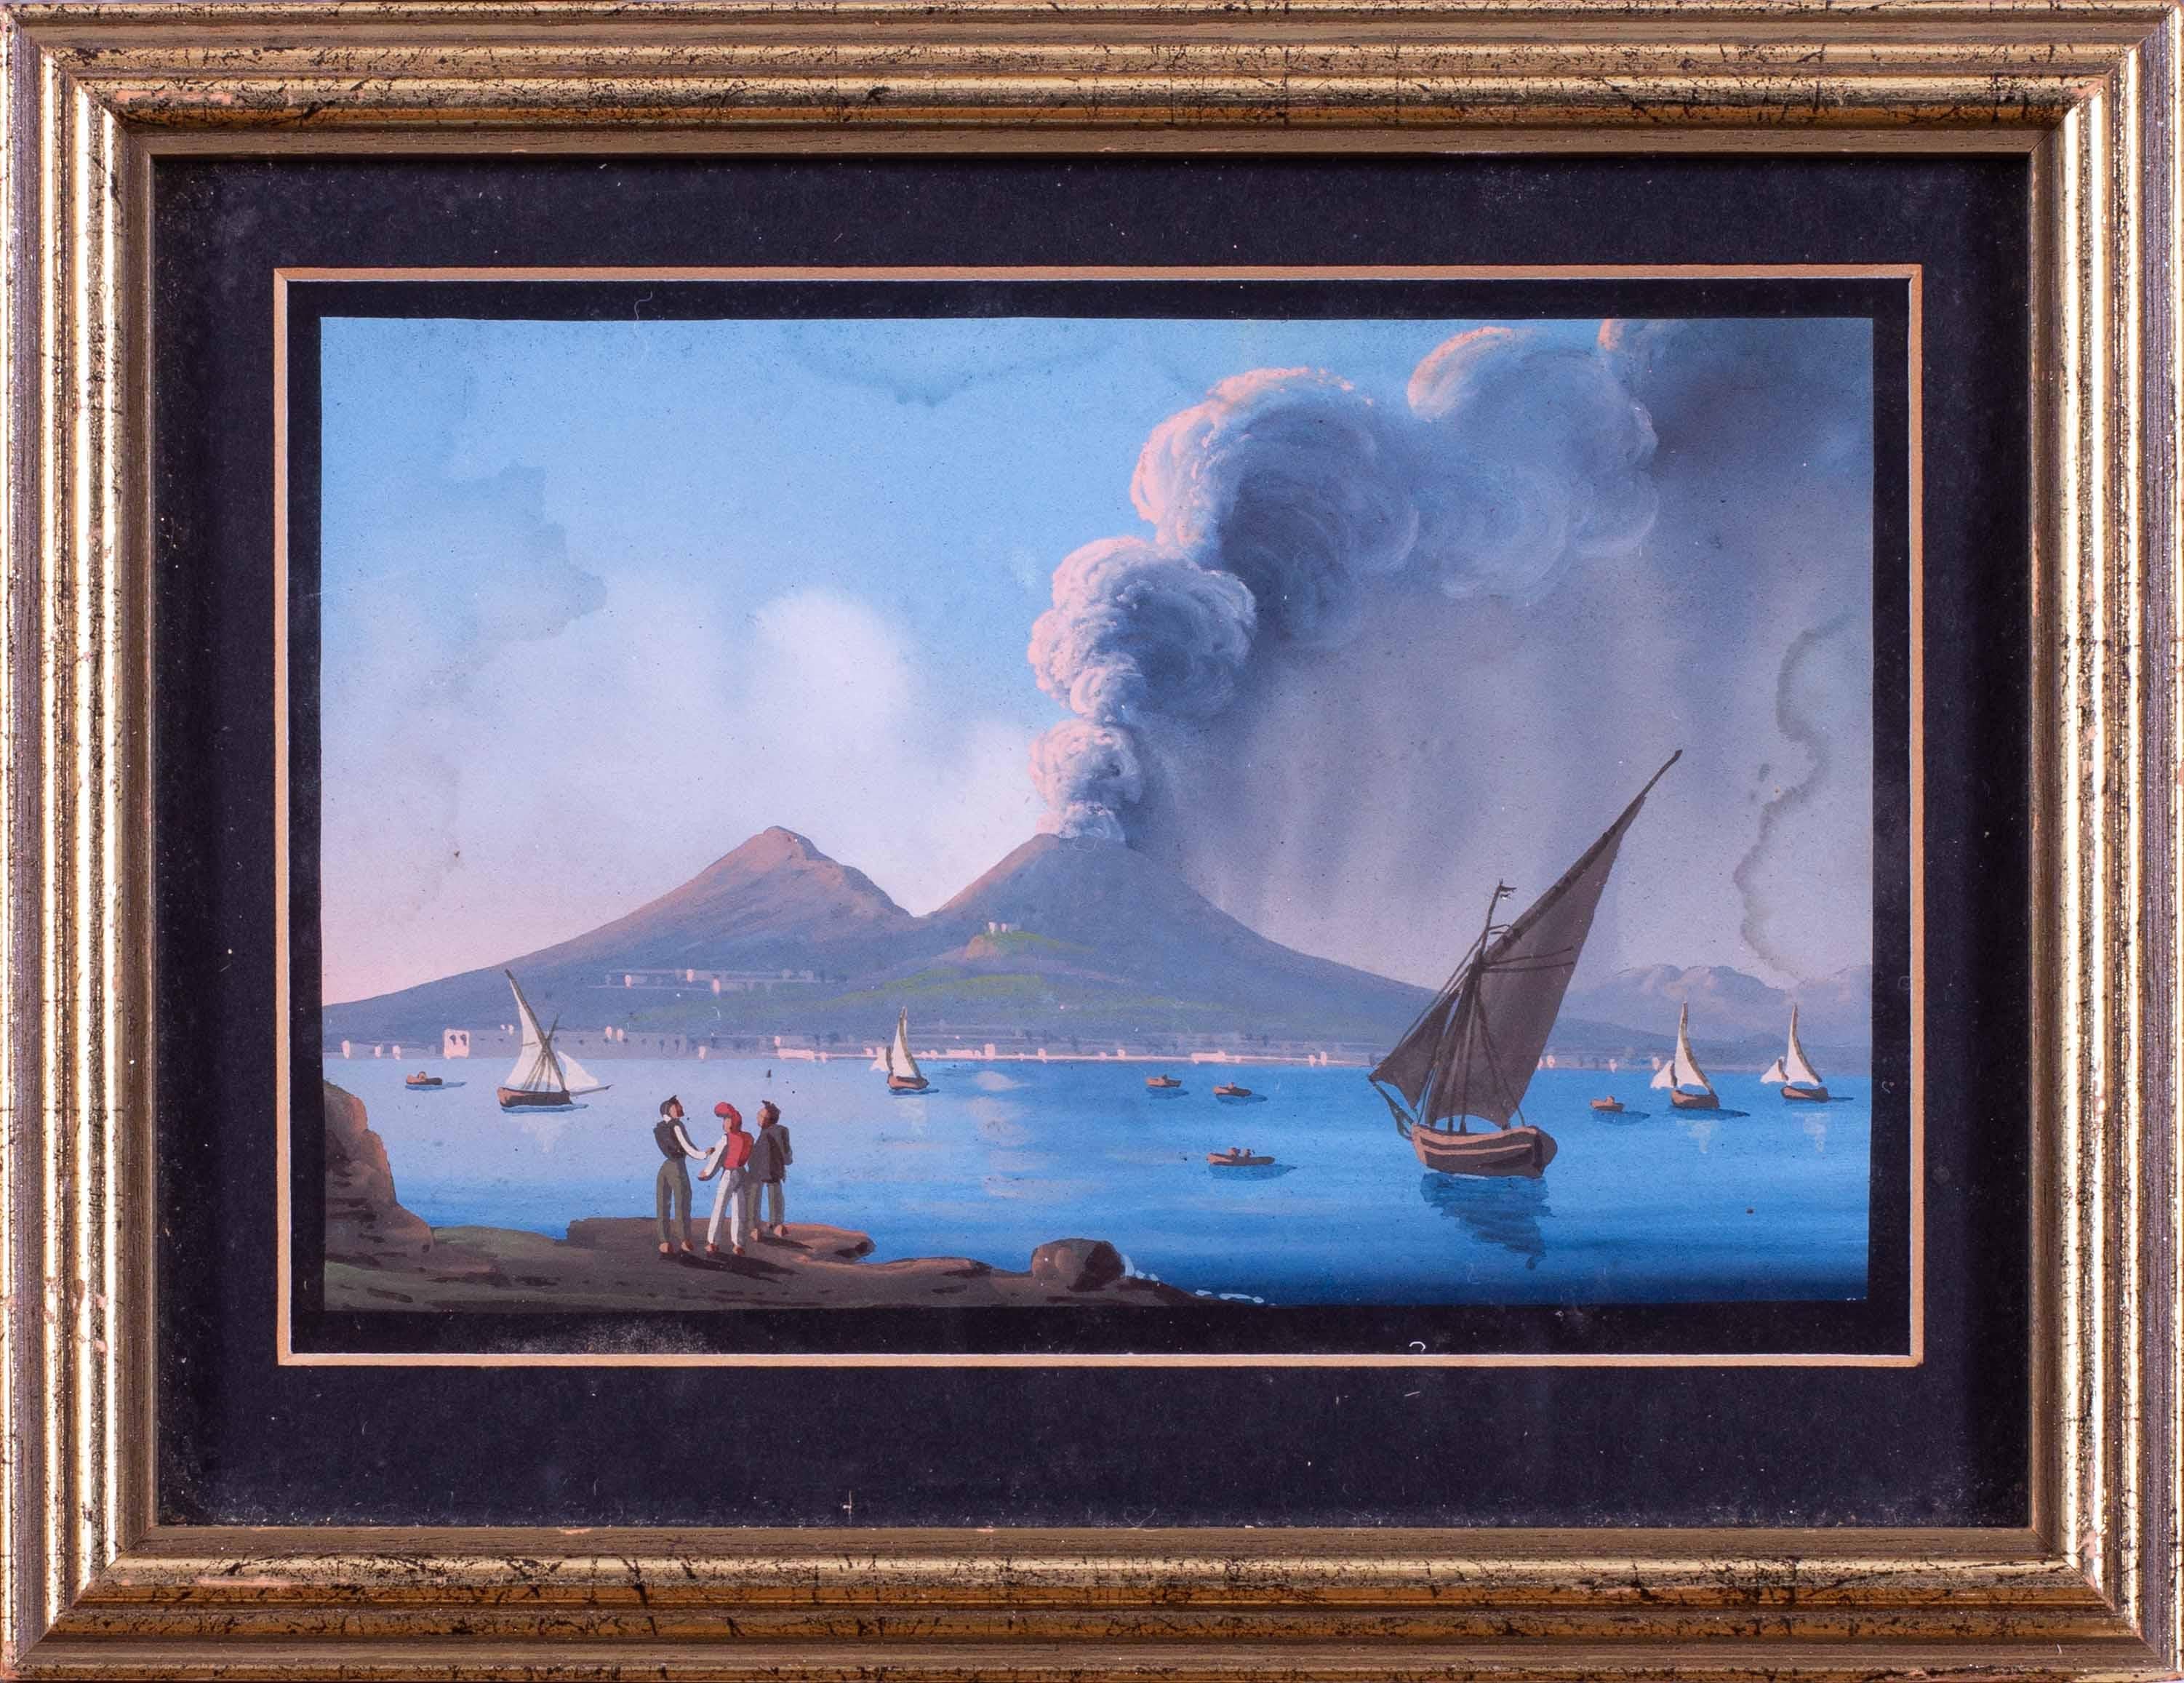 Pair of small 19th Century Italian paintings of Vesuvius erupting in Naples - Painting by Giocacchino L Pira